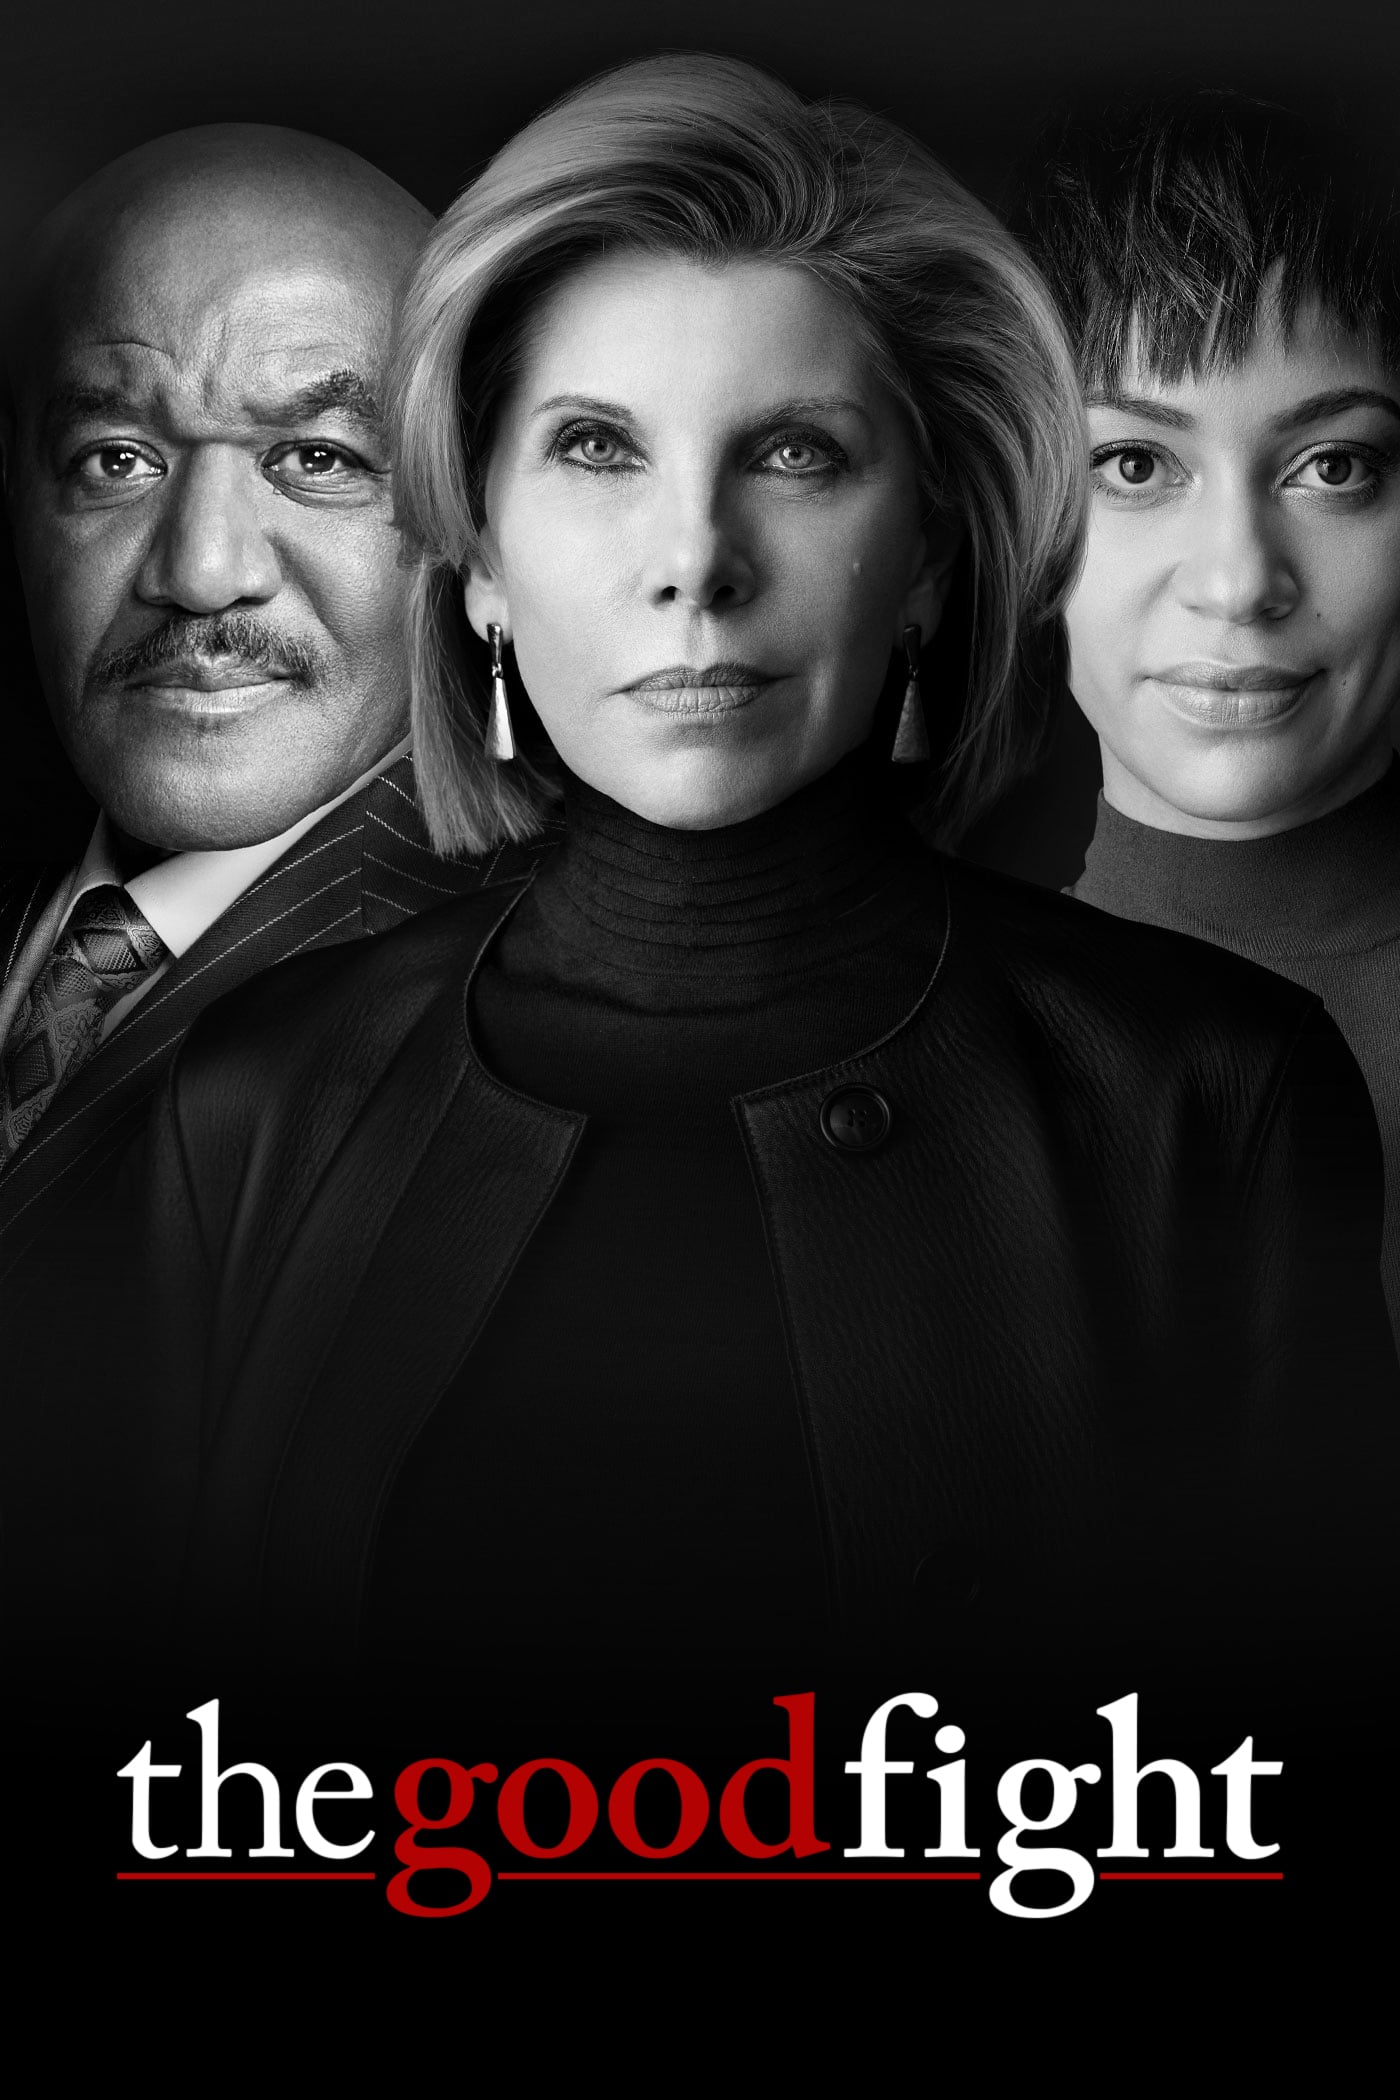 The Good Fight rating